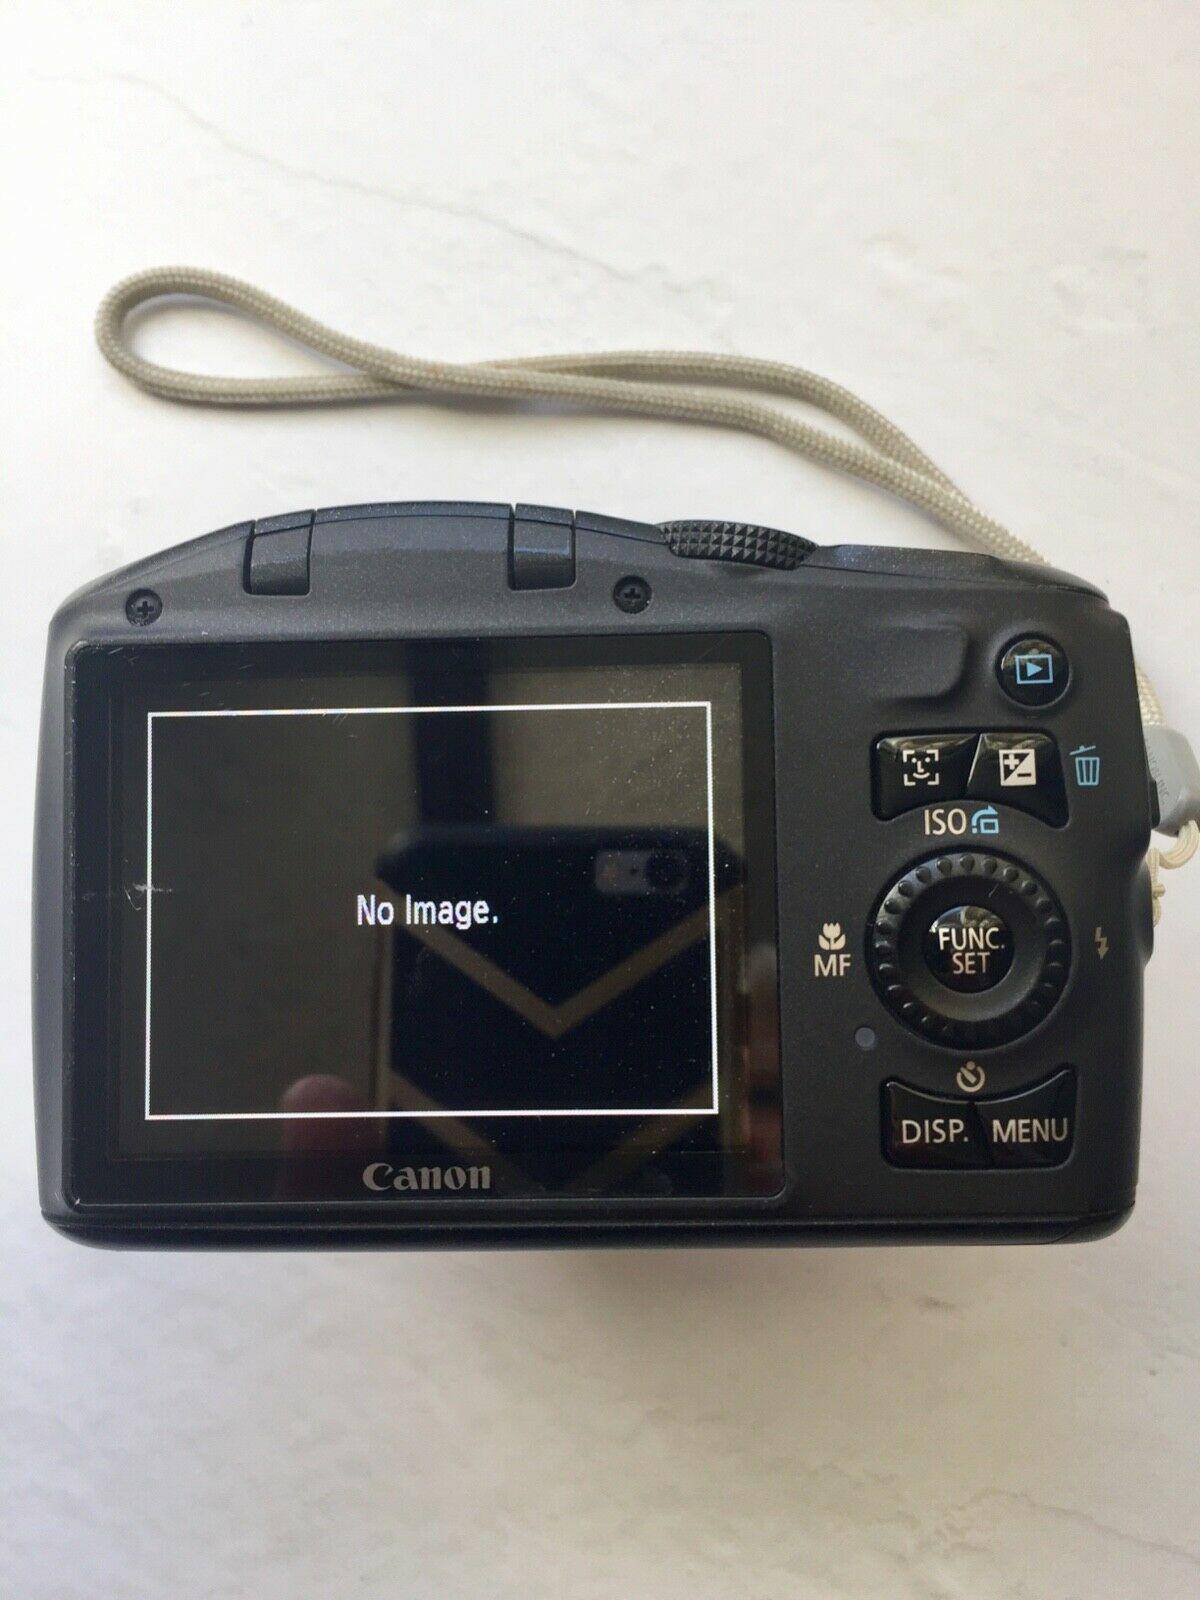 USED CANON Digital CAMERA POWERSHOT SX130 IS 12.1MP Digital 12x Optical Zoom + 8GB Memory Card Fully Tested